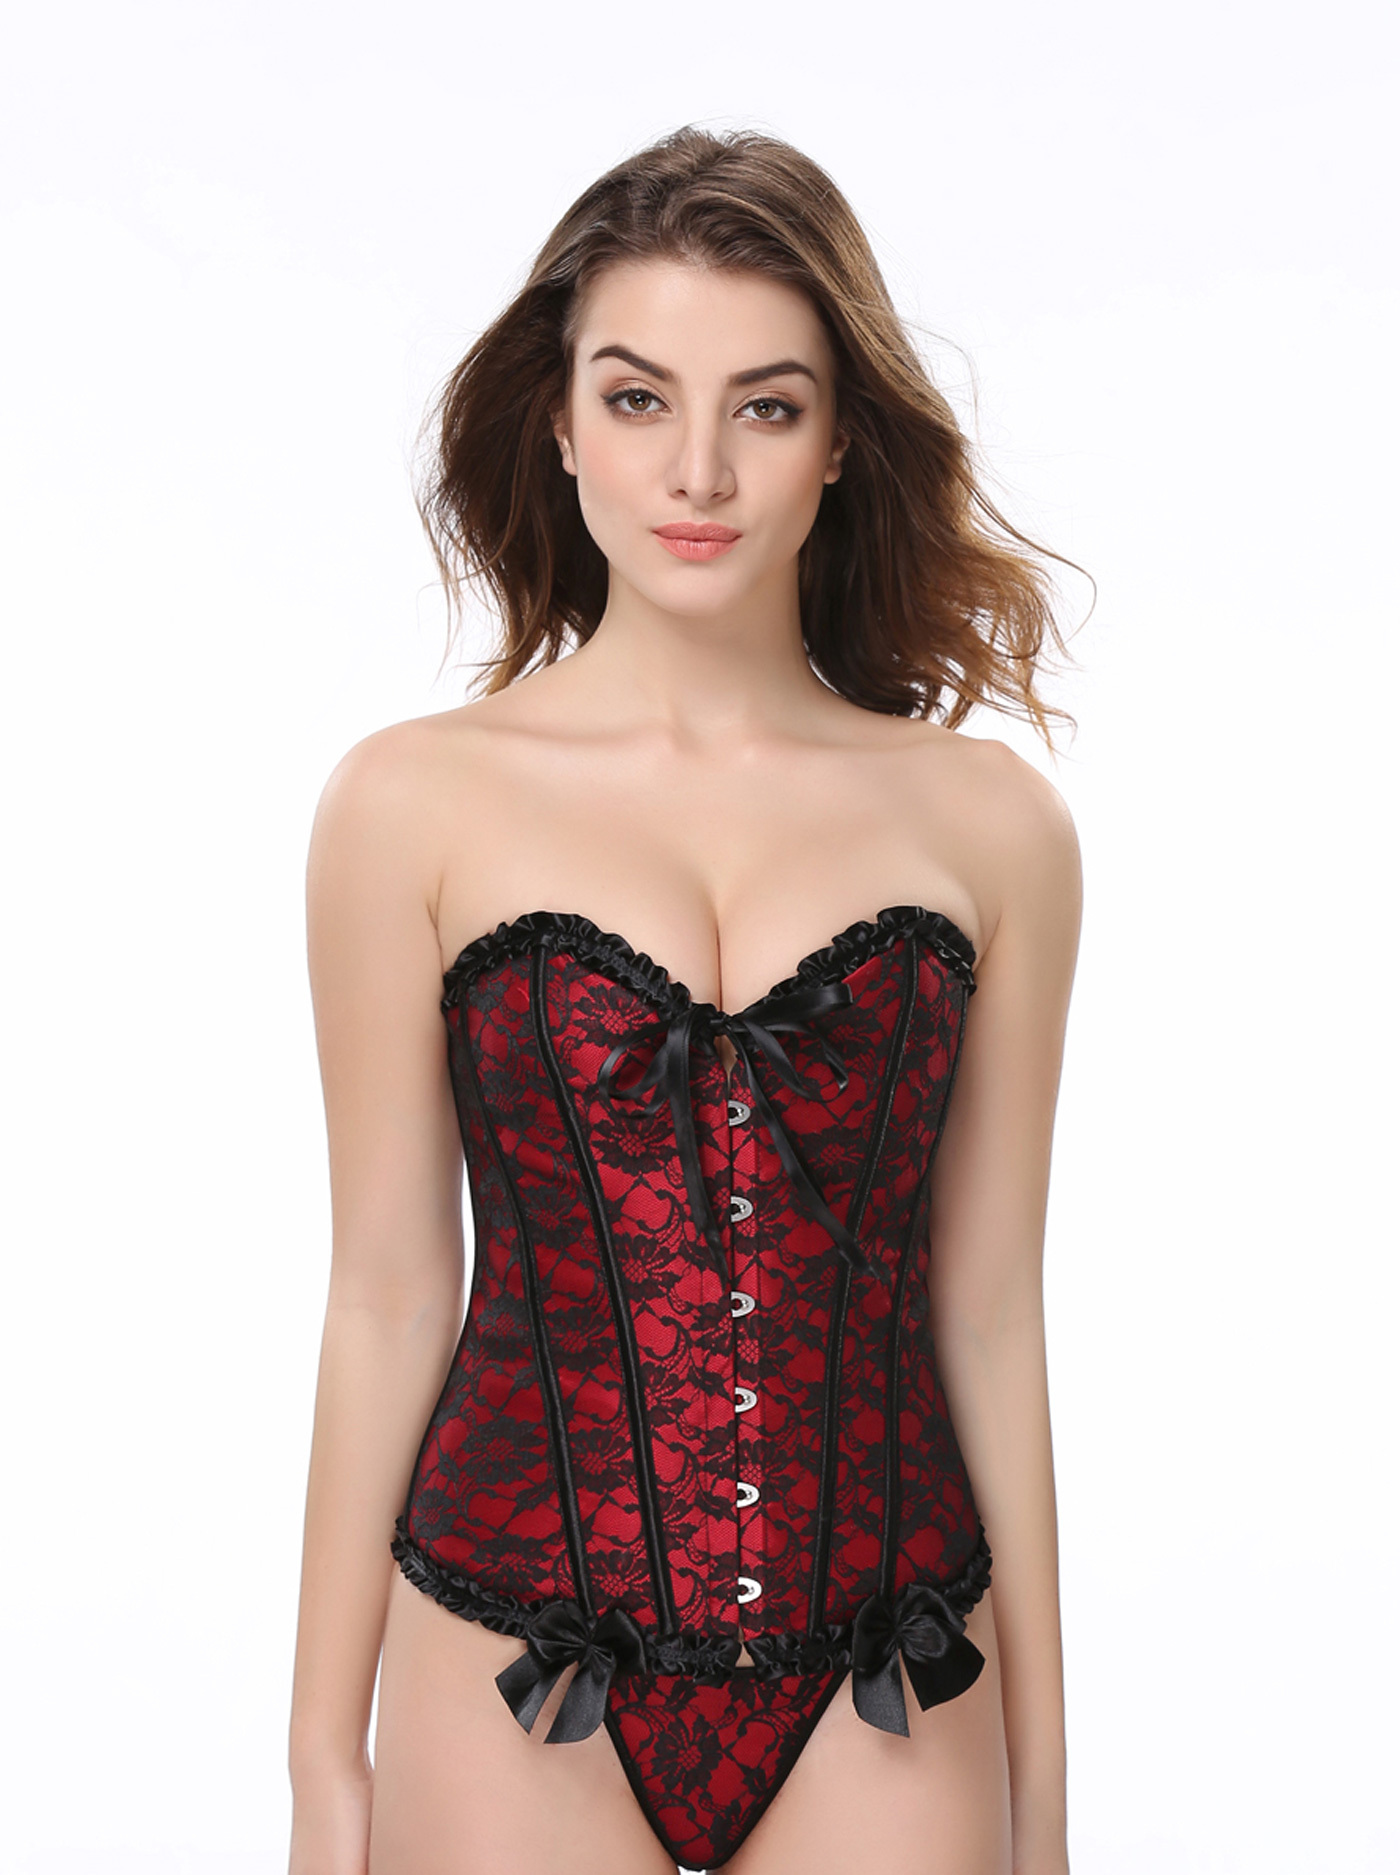 Unigds Women's Corsets Top Floral Lace Up Overbust India